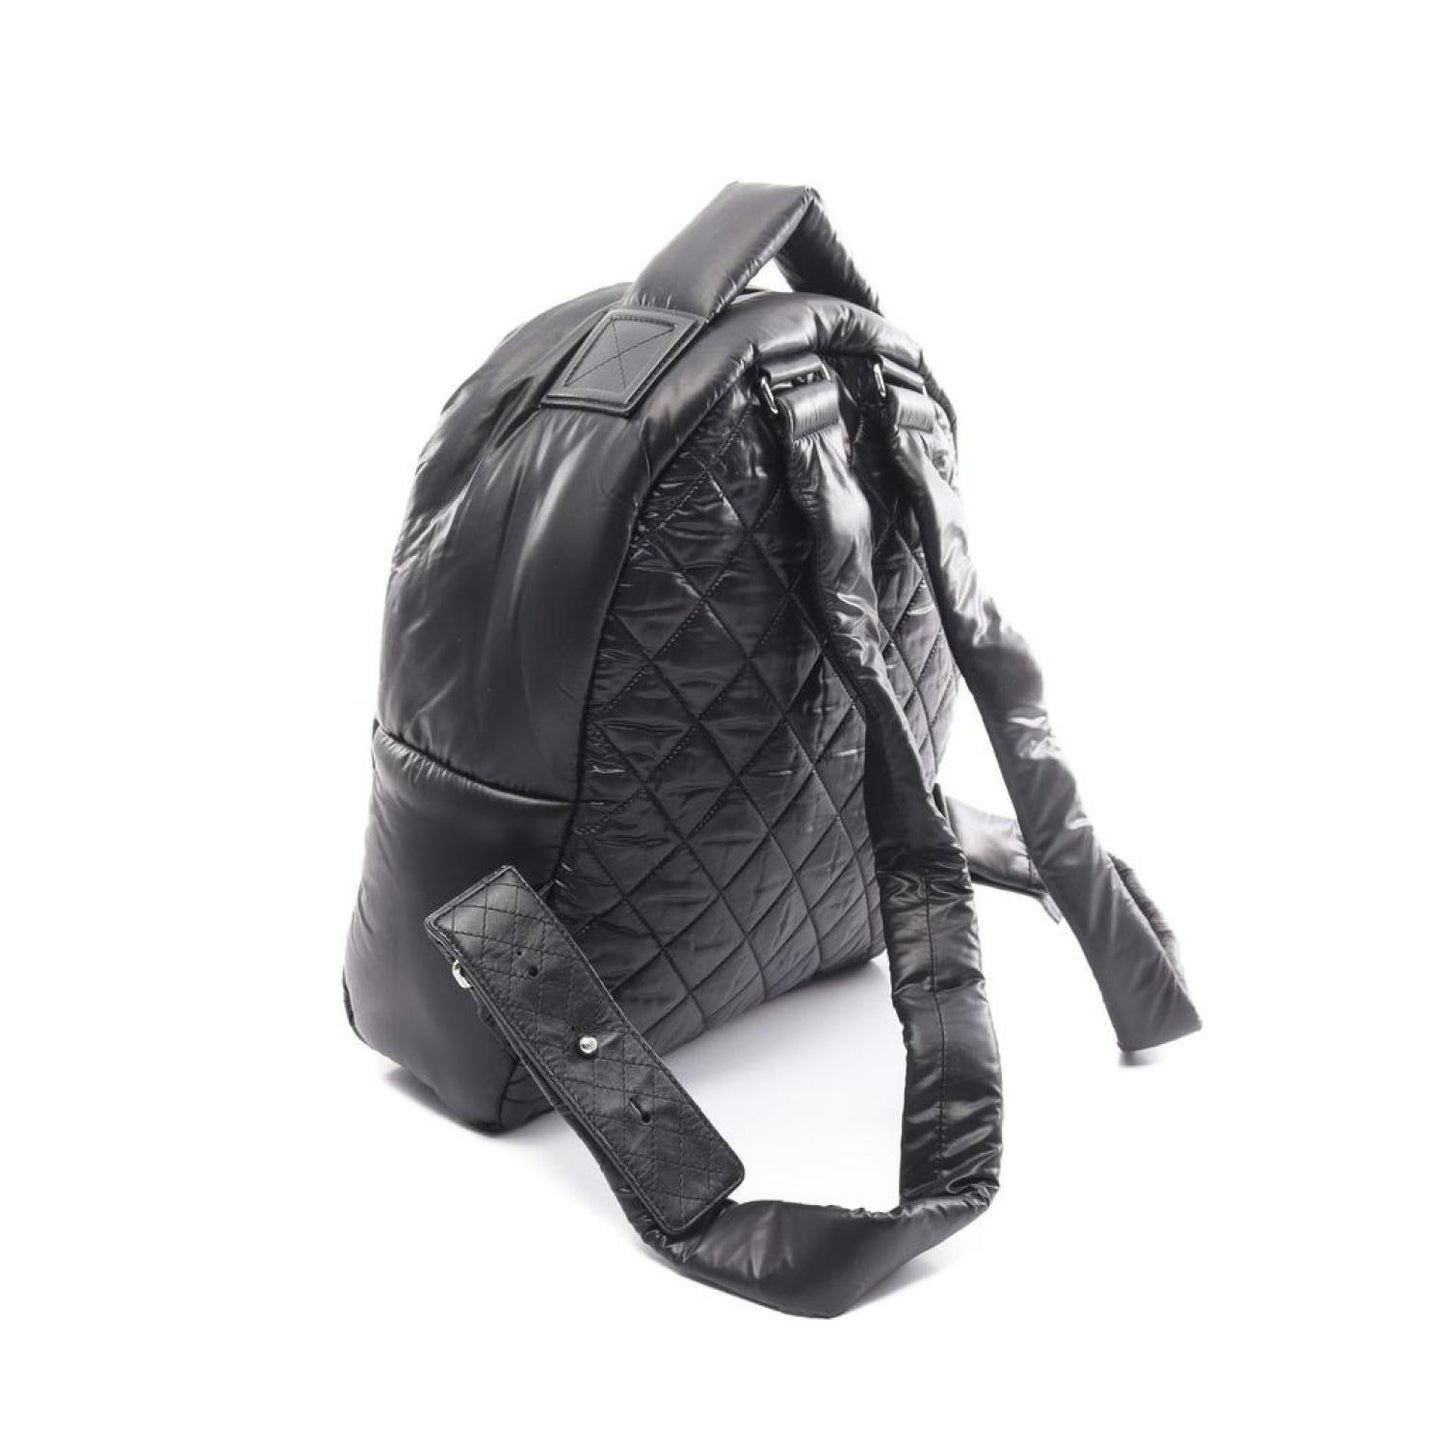 Coco Coon Backpack Rucksack Nylon Leather  Silver Hardware